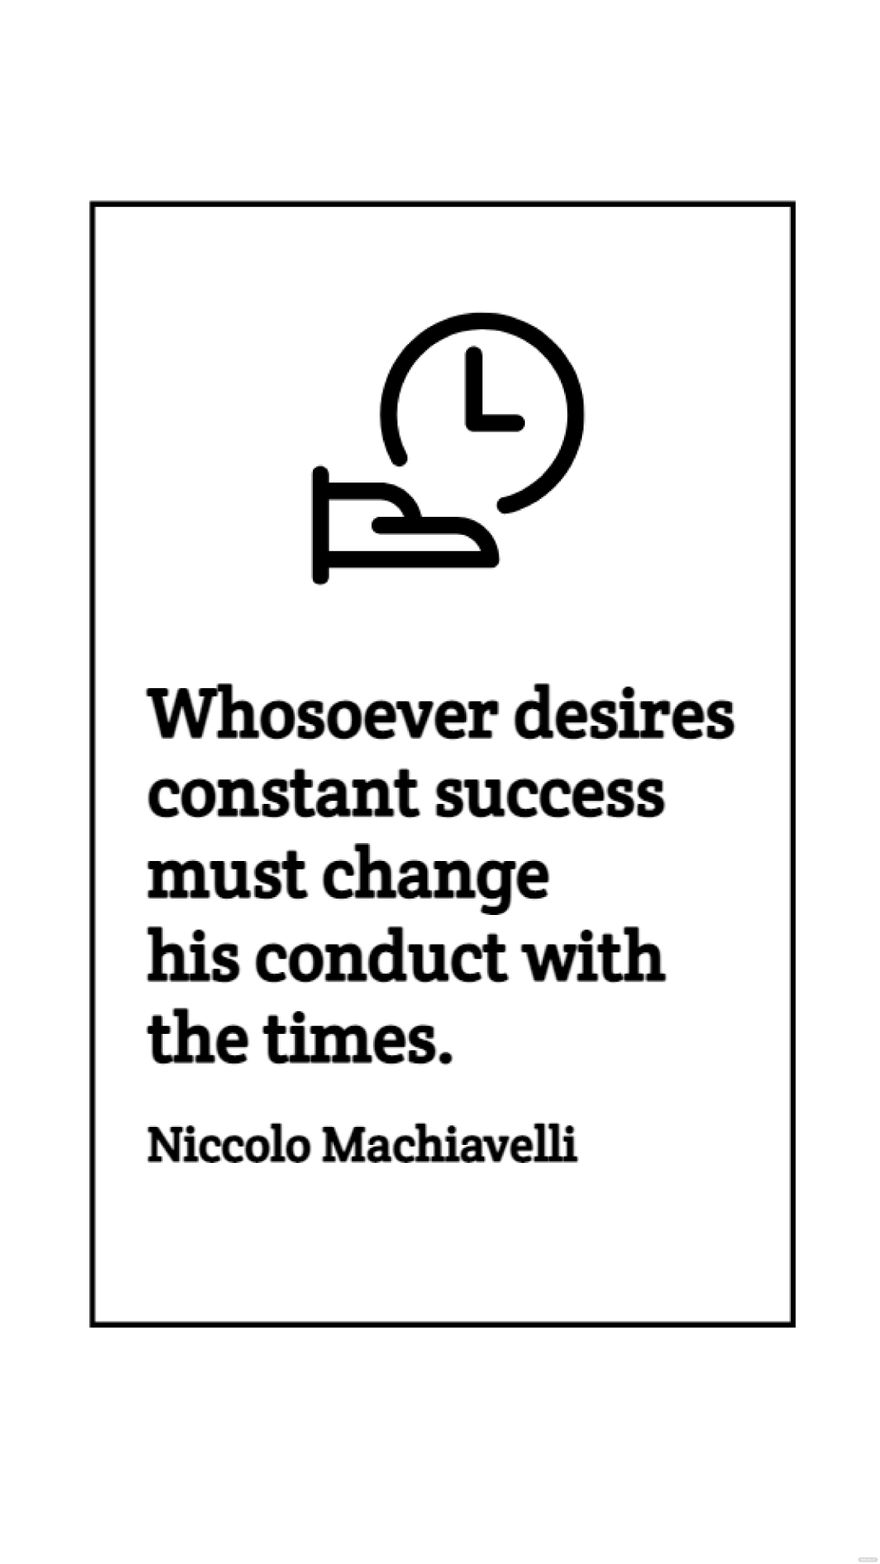 Niccolo Machiavelli - Whosoever desires constant success must change his conduct with the times. in JPG